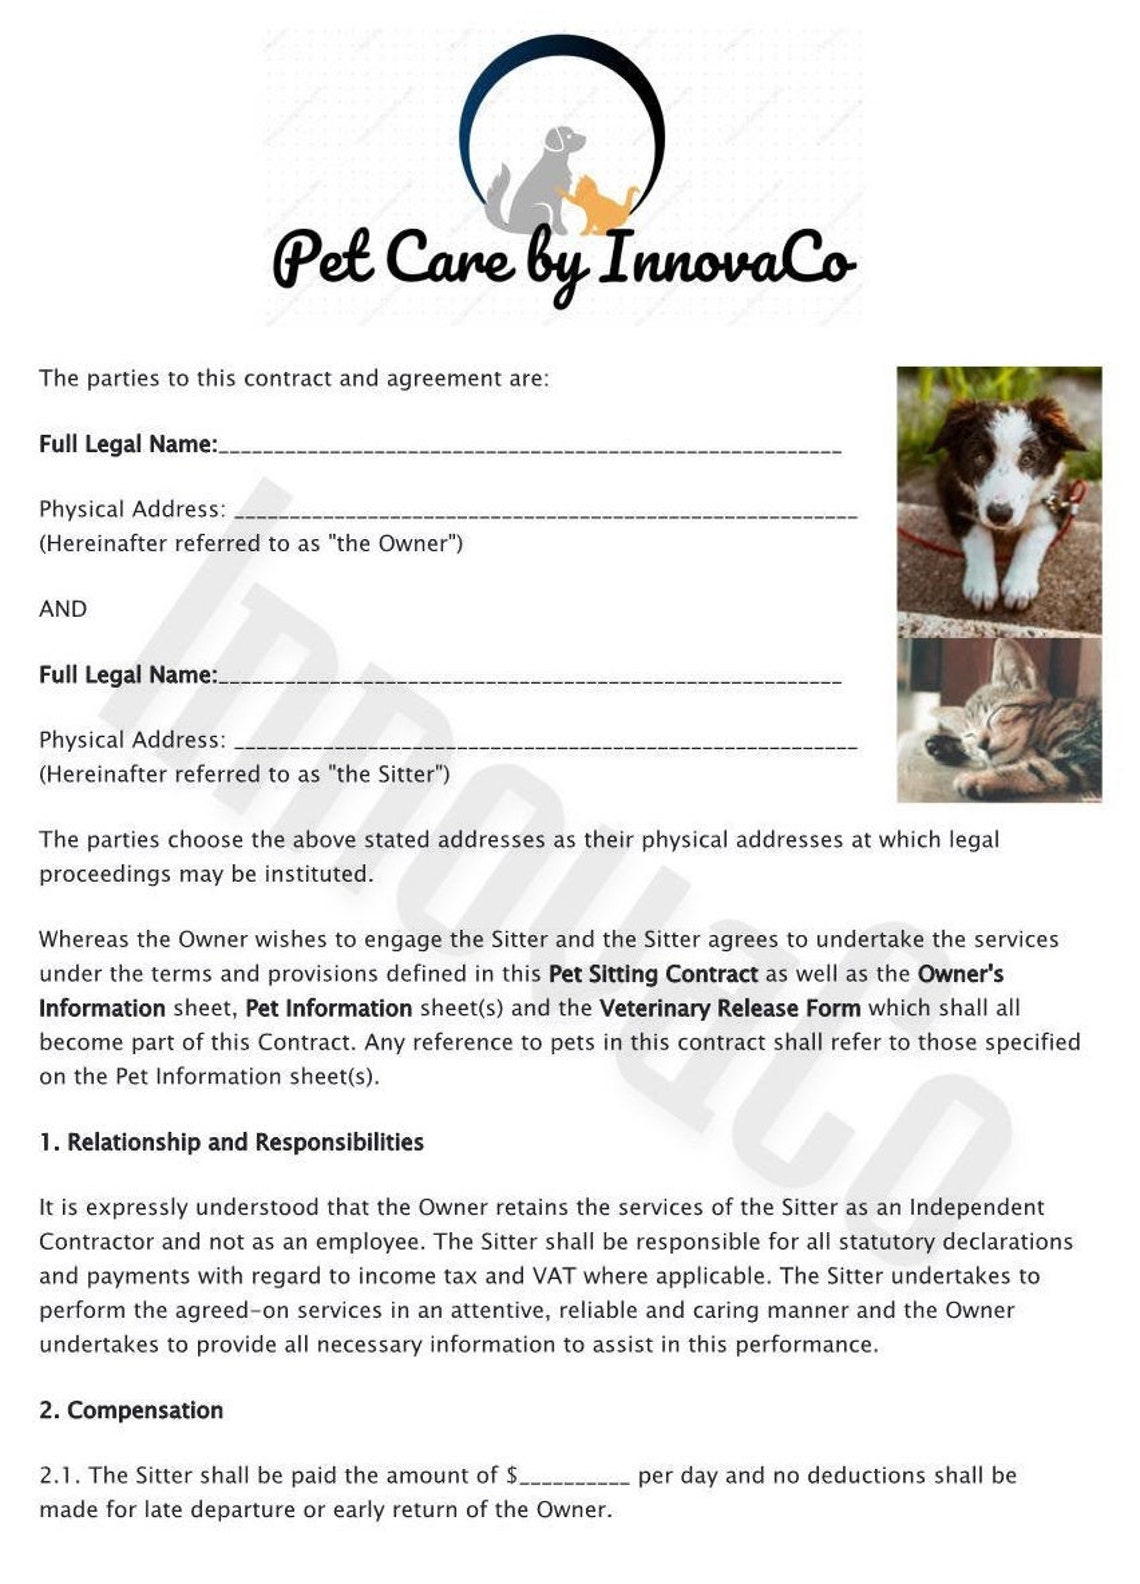 pet-care-agreement-pet-sitting-contract-pet-care-contract-etsy